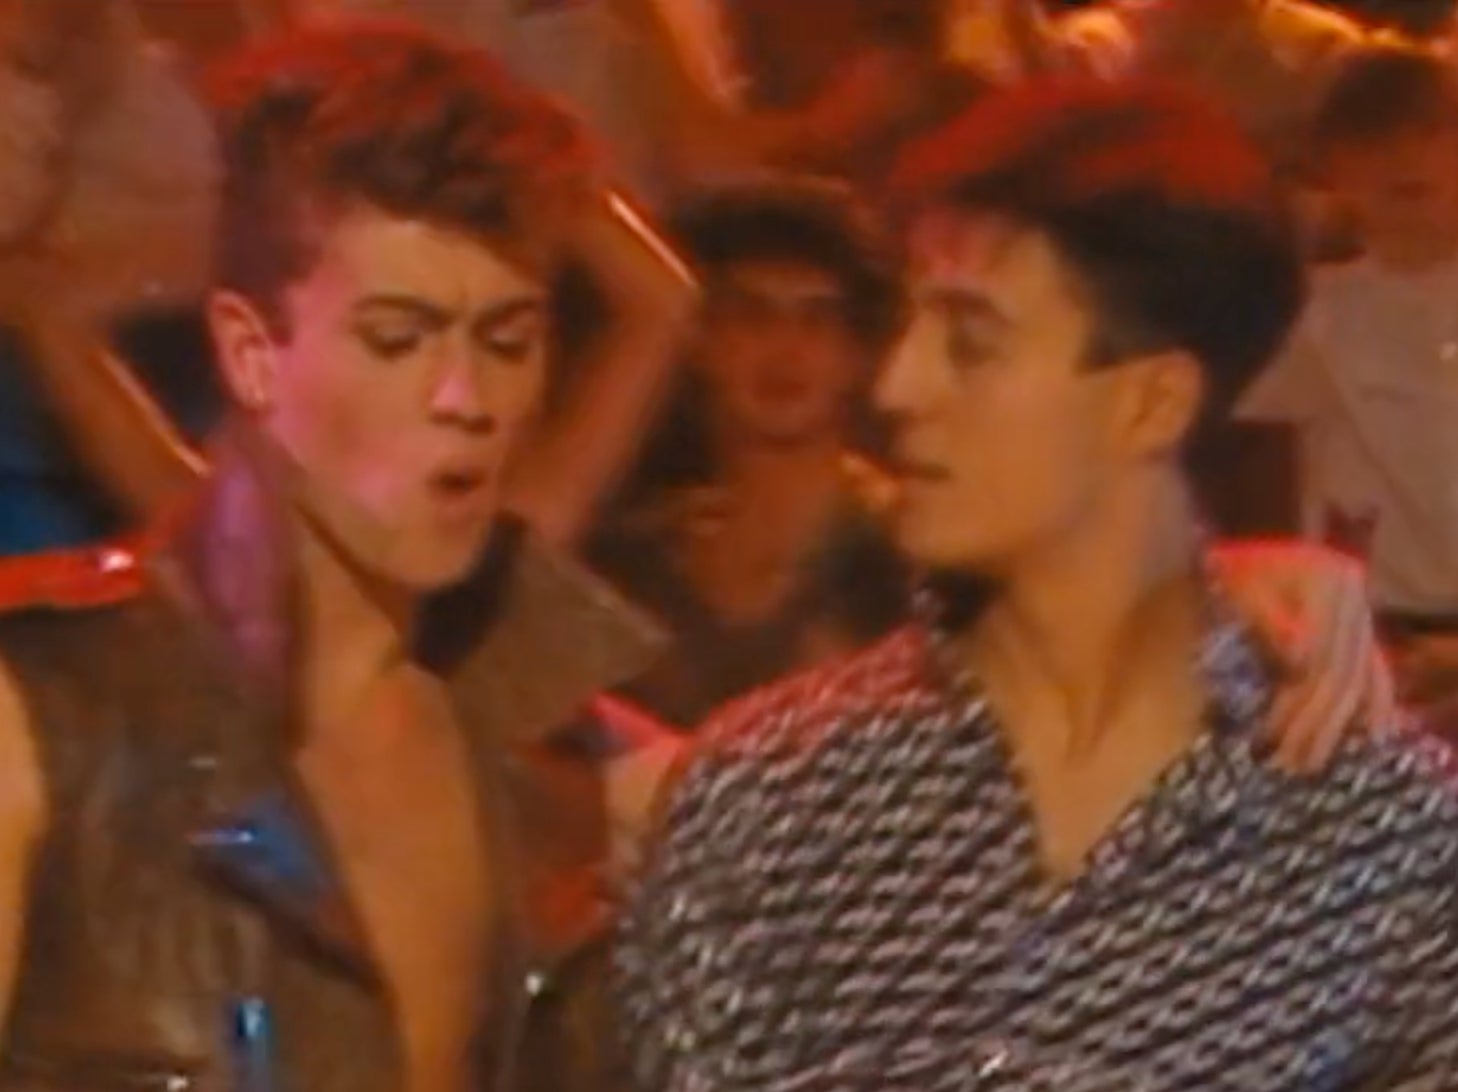 Wham!’s ‘Young Guns’ appearance on ‘Top of the Pops’ launched their career